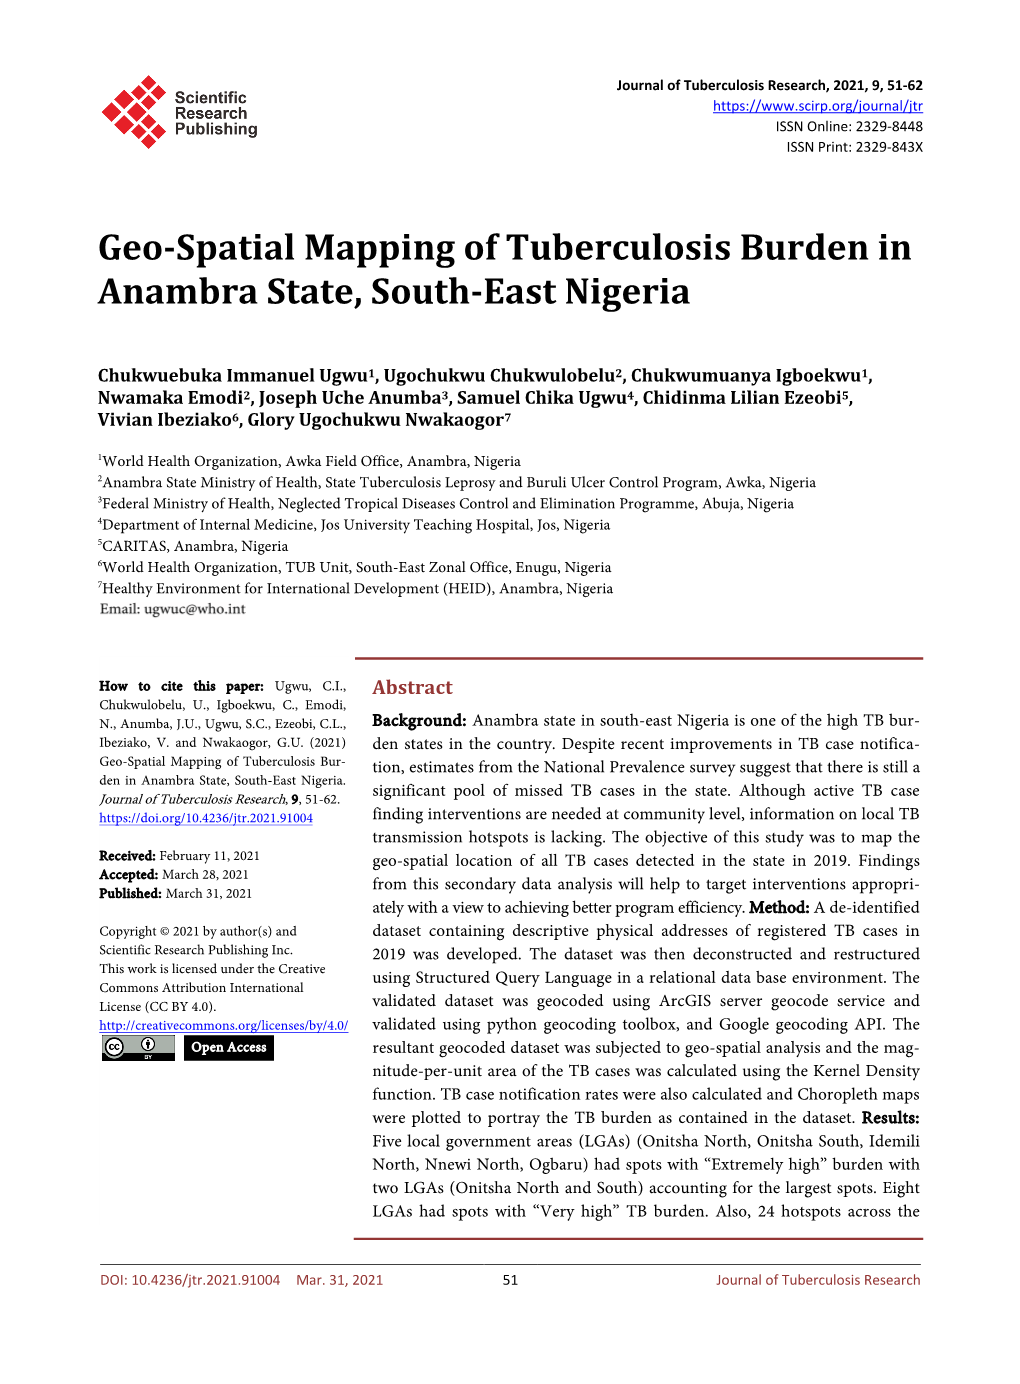 Geo-Spatial Mapping of Tuberculosis Burden in Anambra State, South-East Nigeria